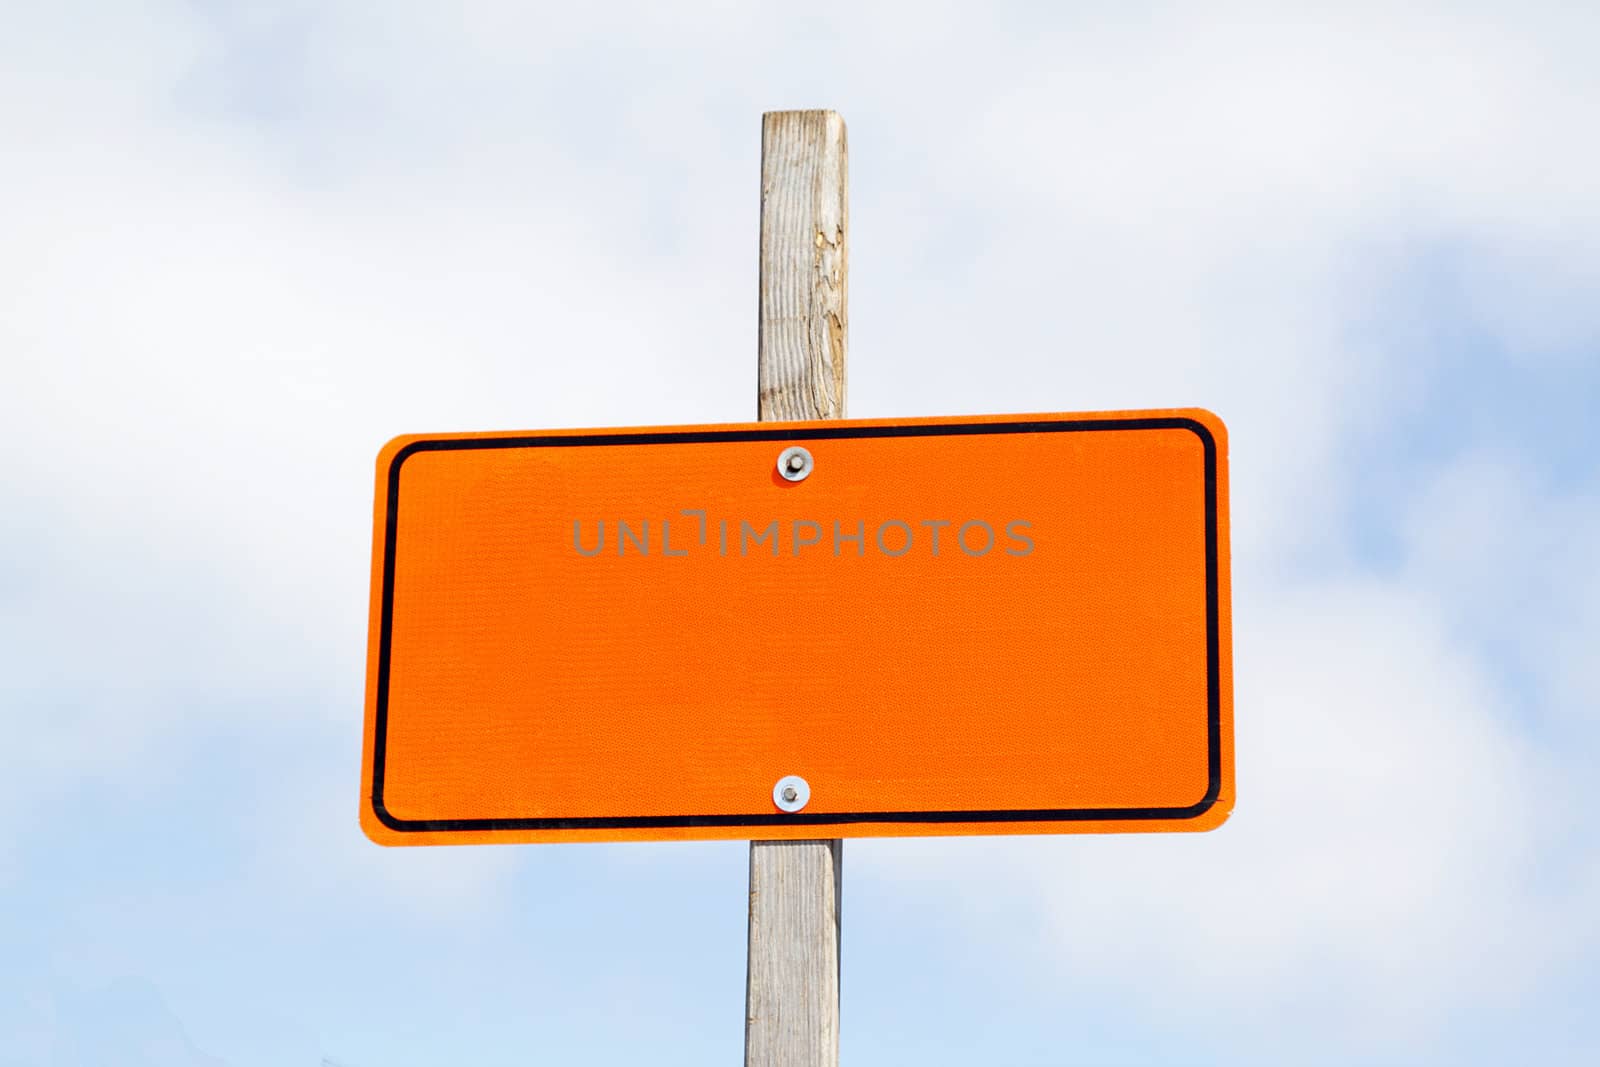 Bright orange road sign over cloudy sky